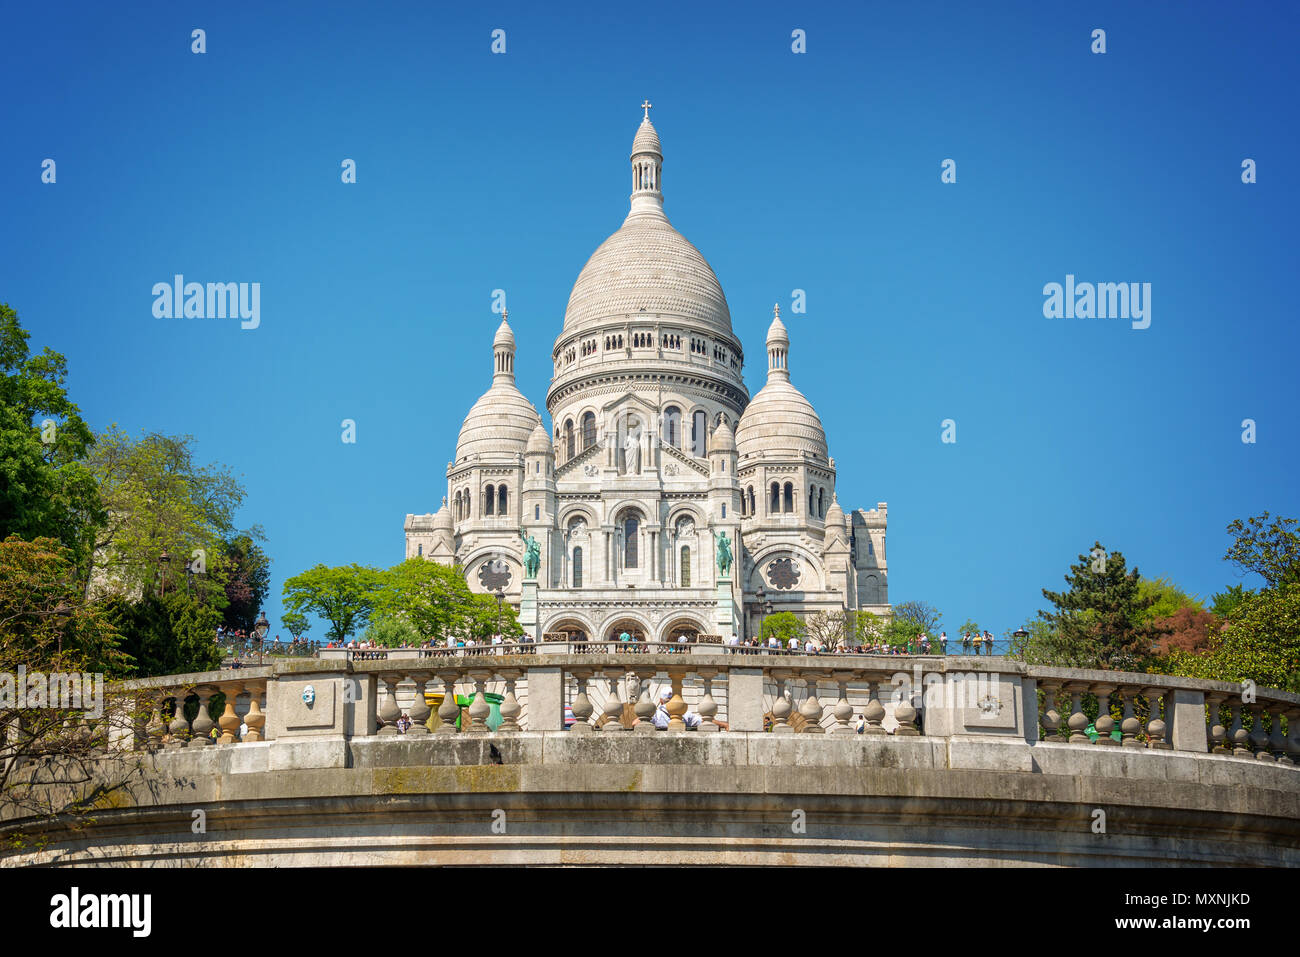 The Basilica of the Sacred Heart in Montmartre, Paris France Stock Photo